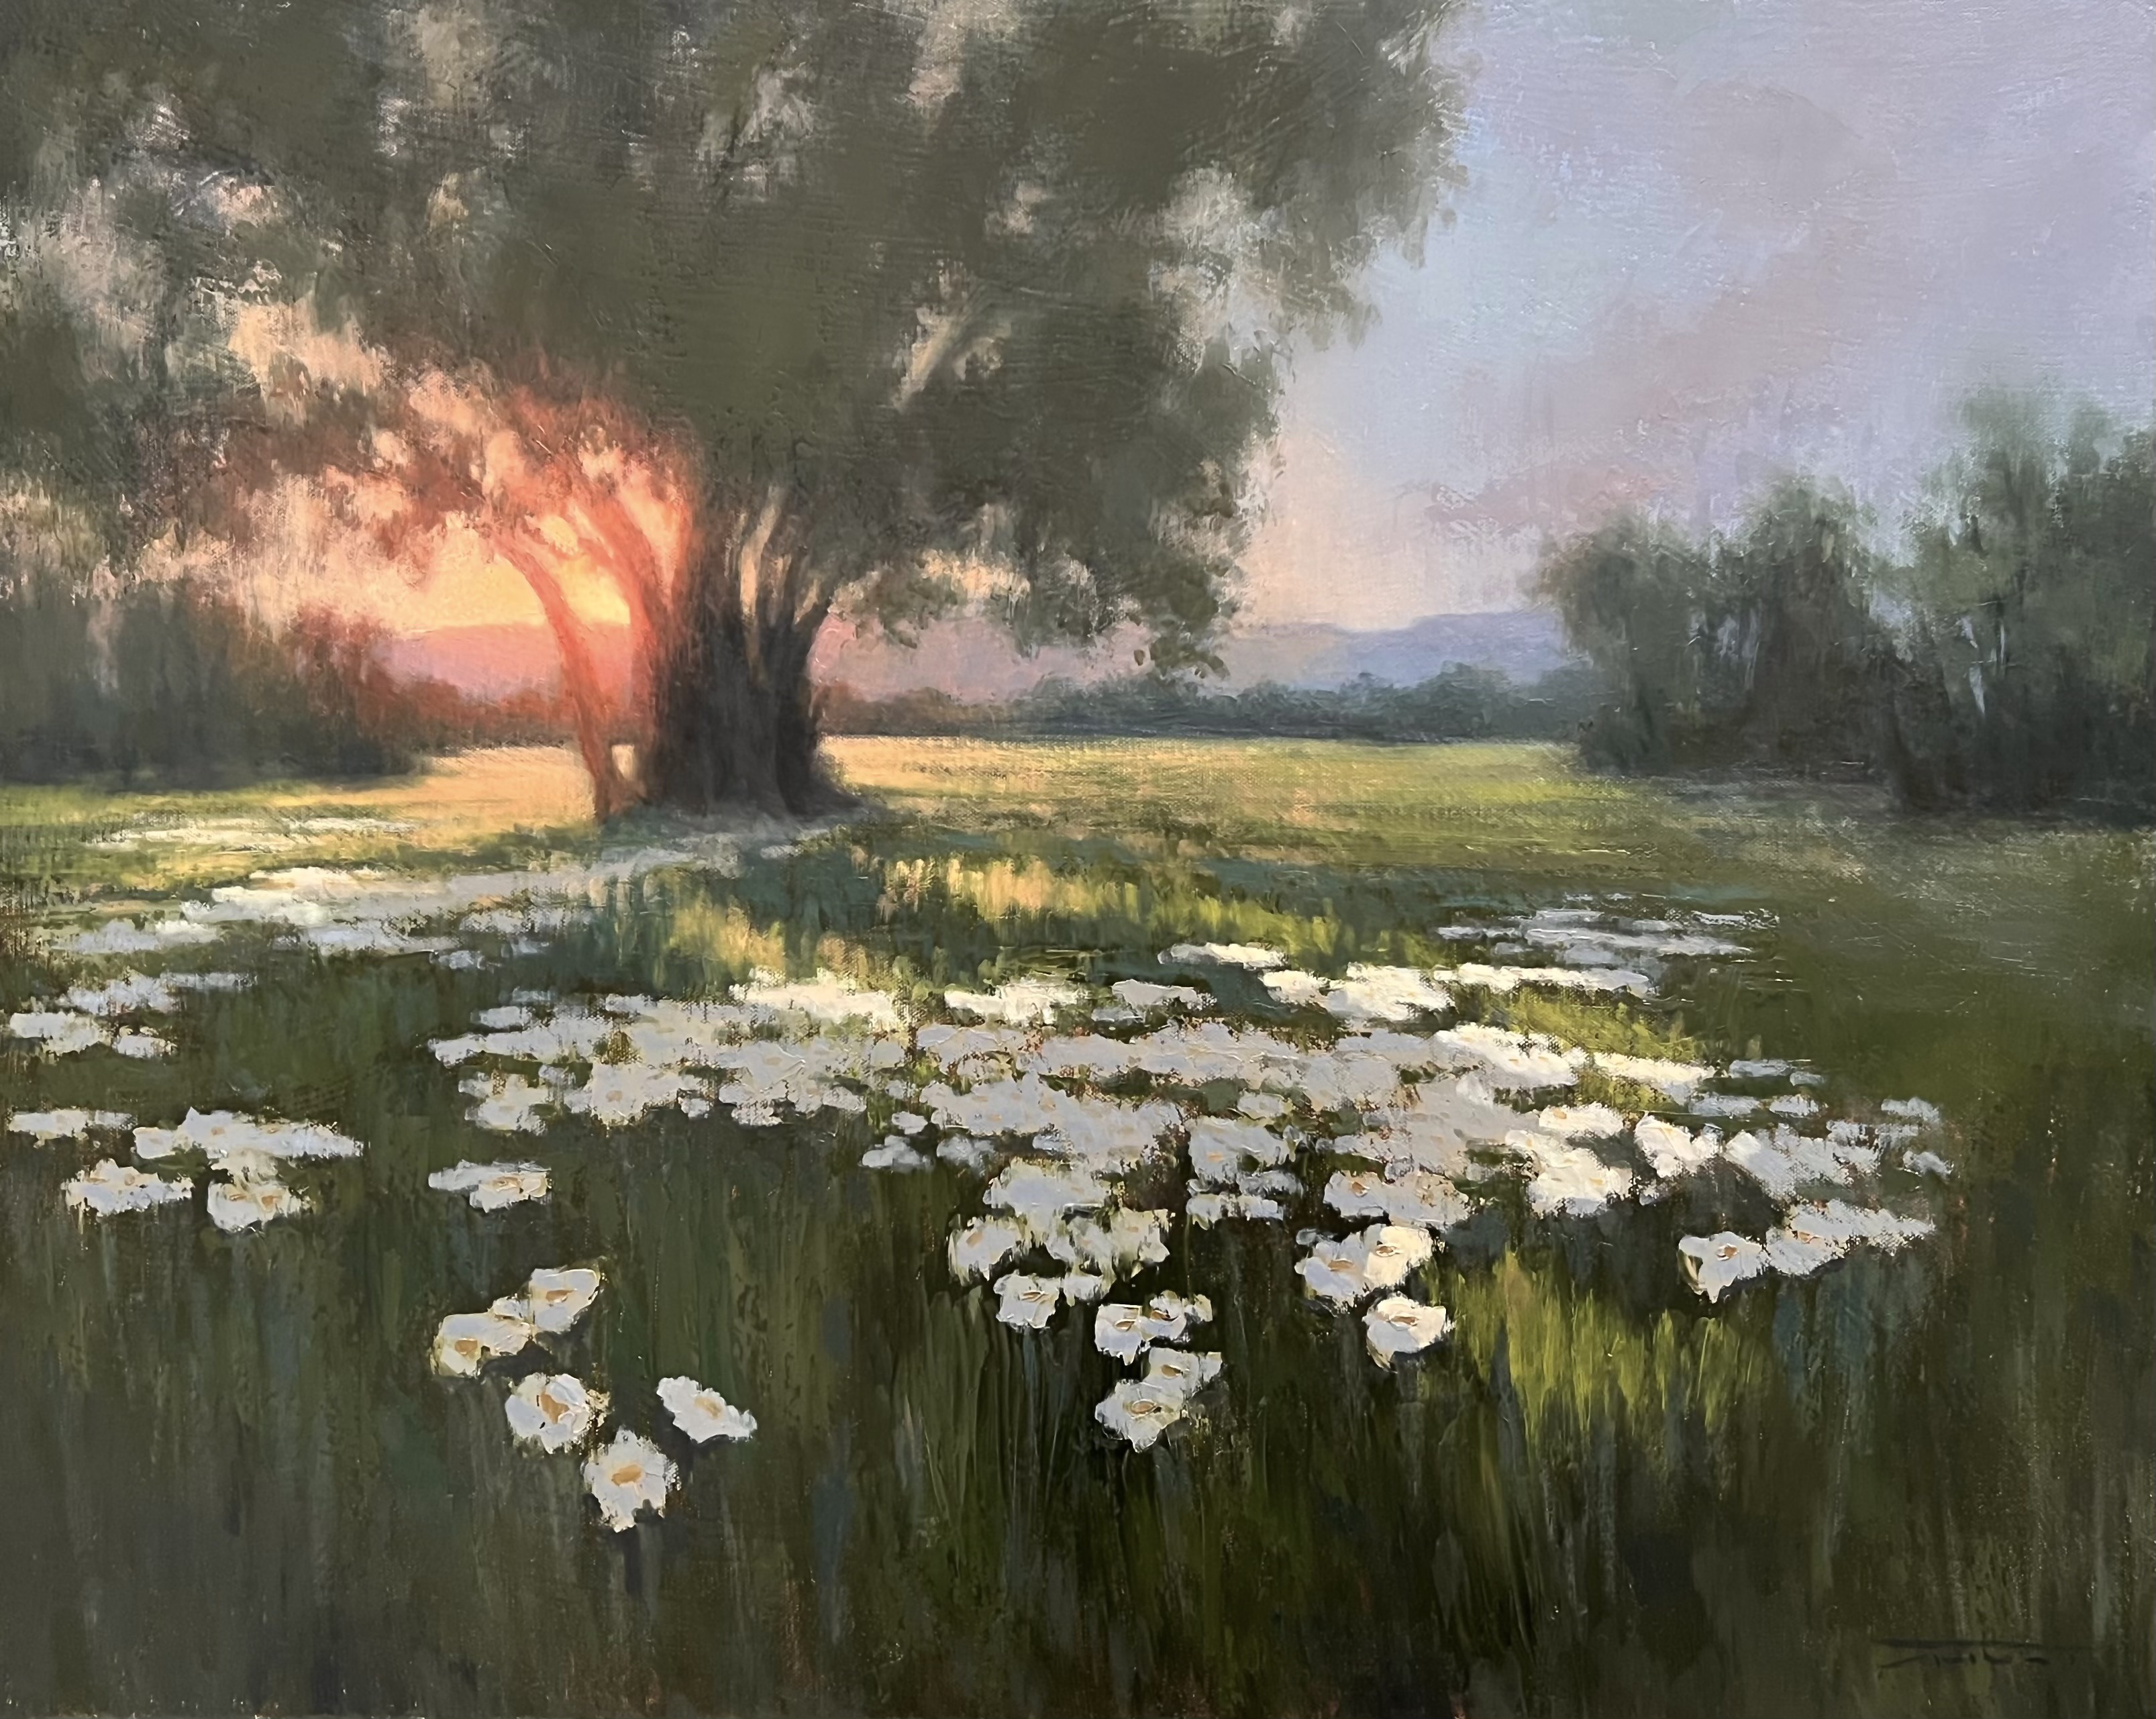 image of summer blooms painting - a tree with evening sunset behind it and white flowers in the foreground